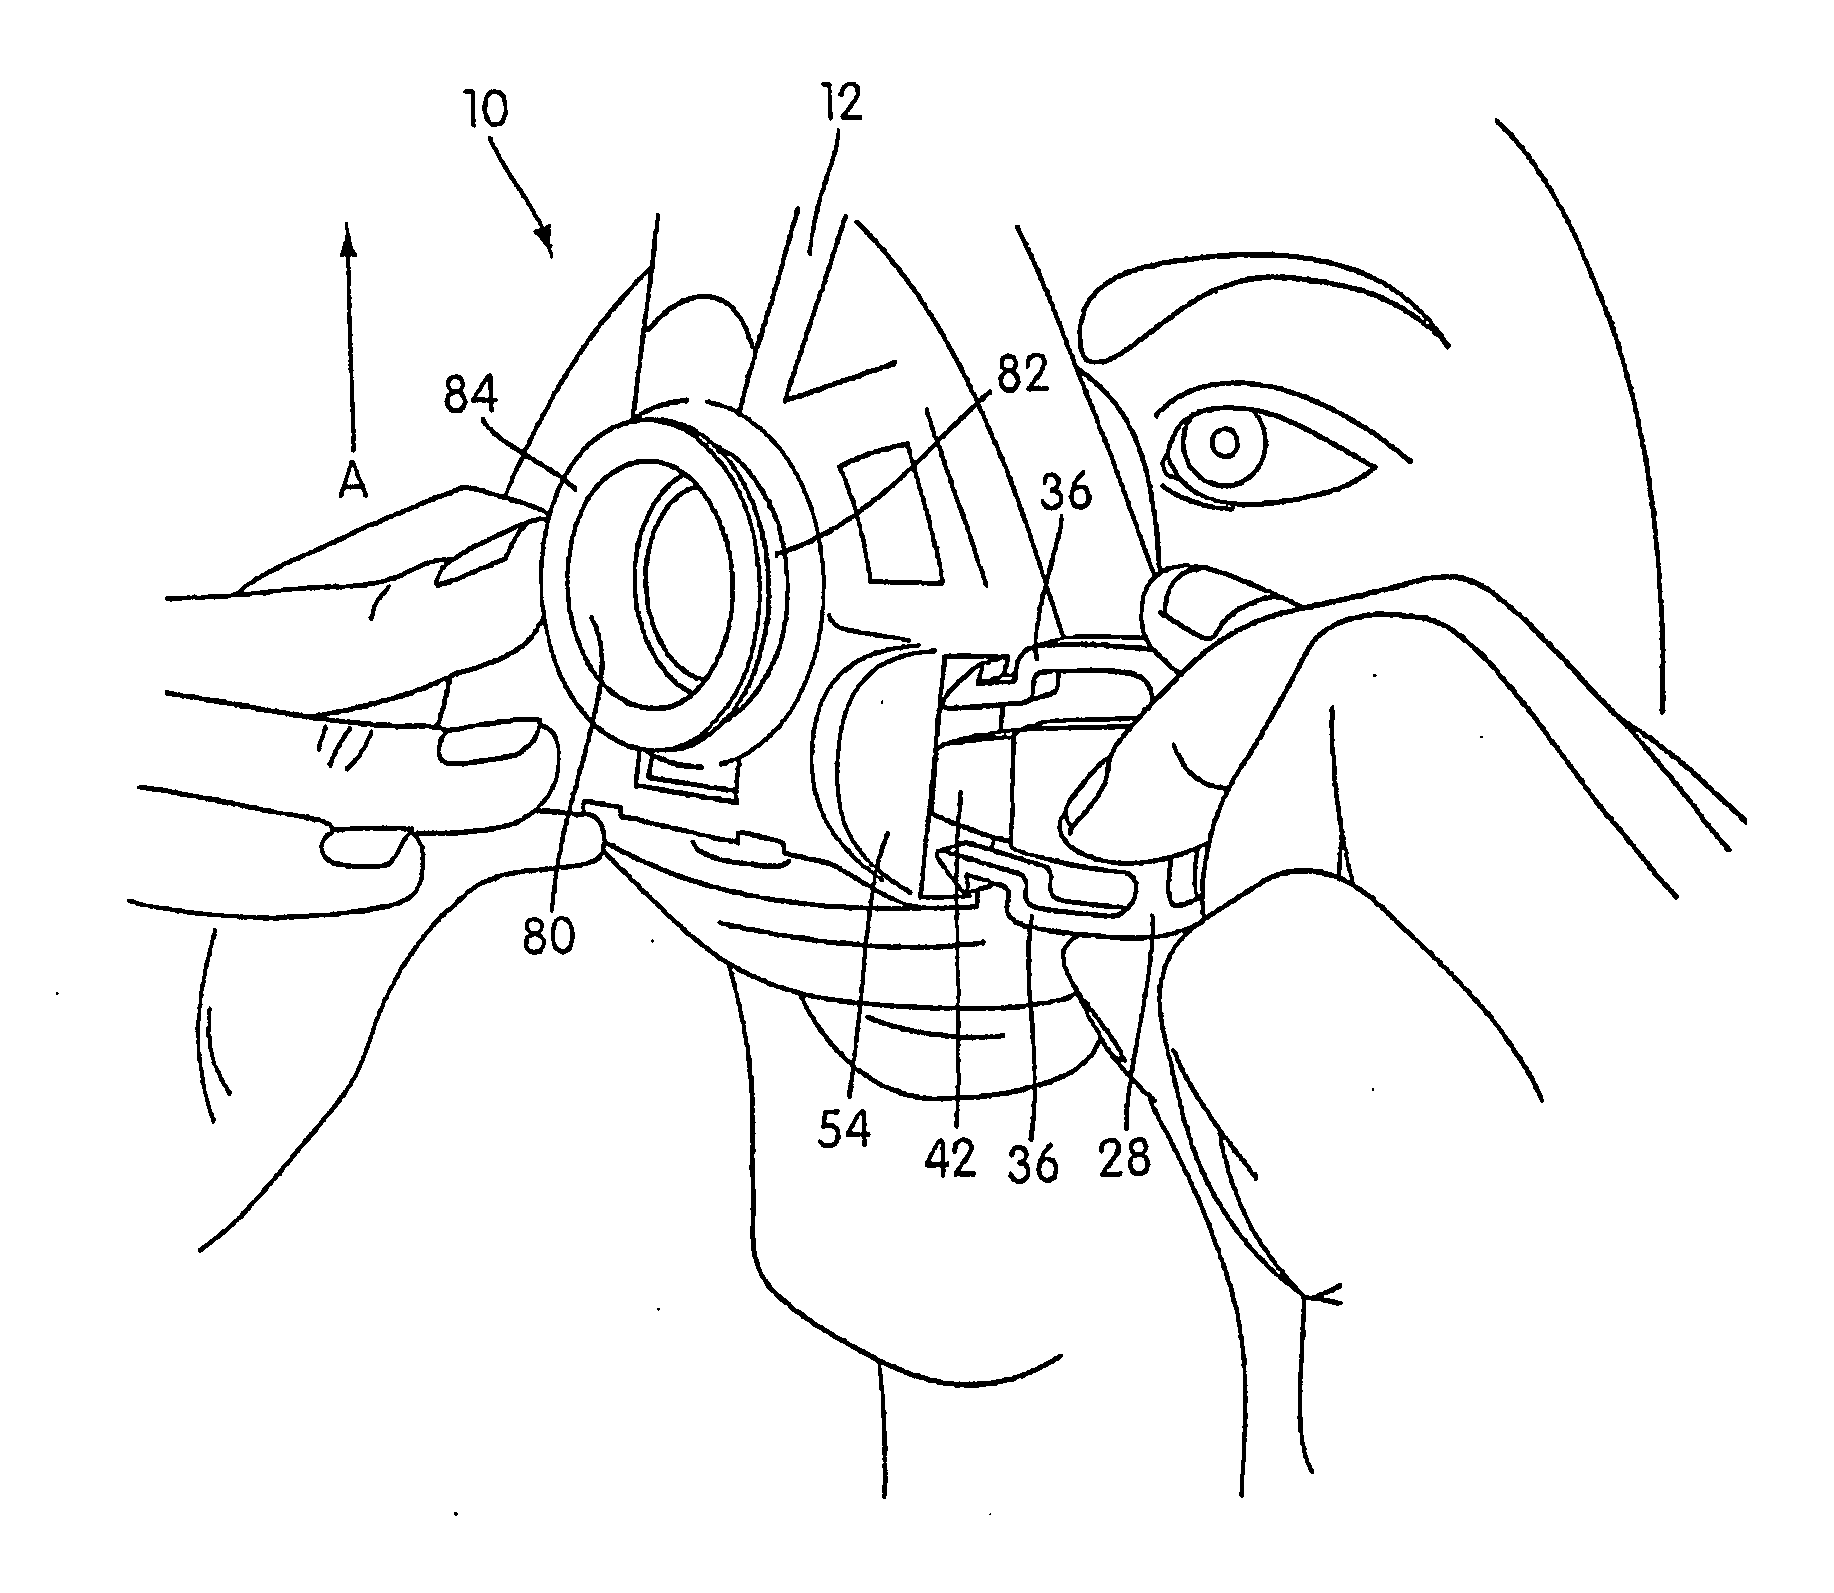 Headgear connection assembly for a respiratory mask assembly